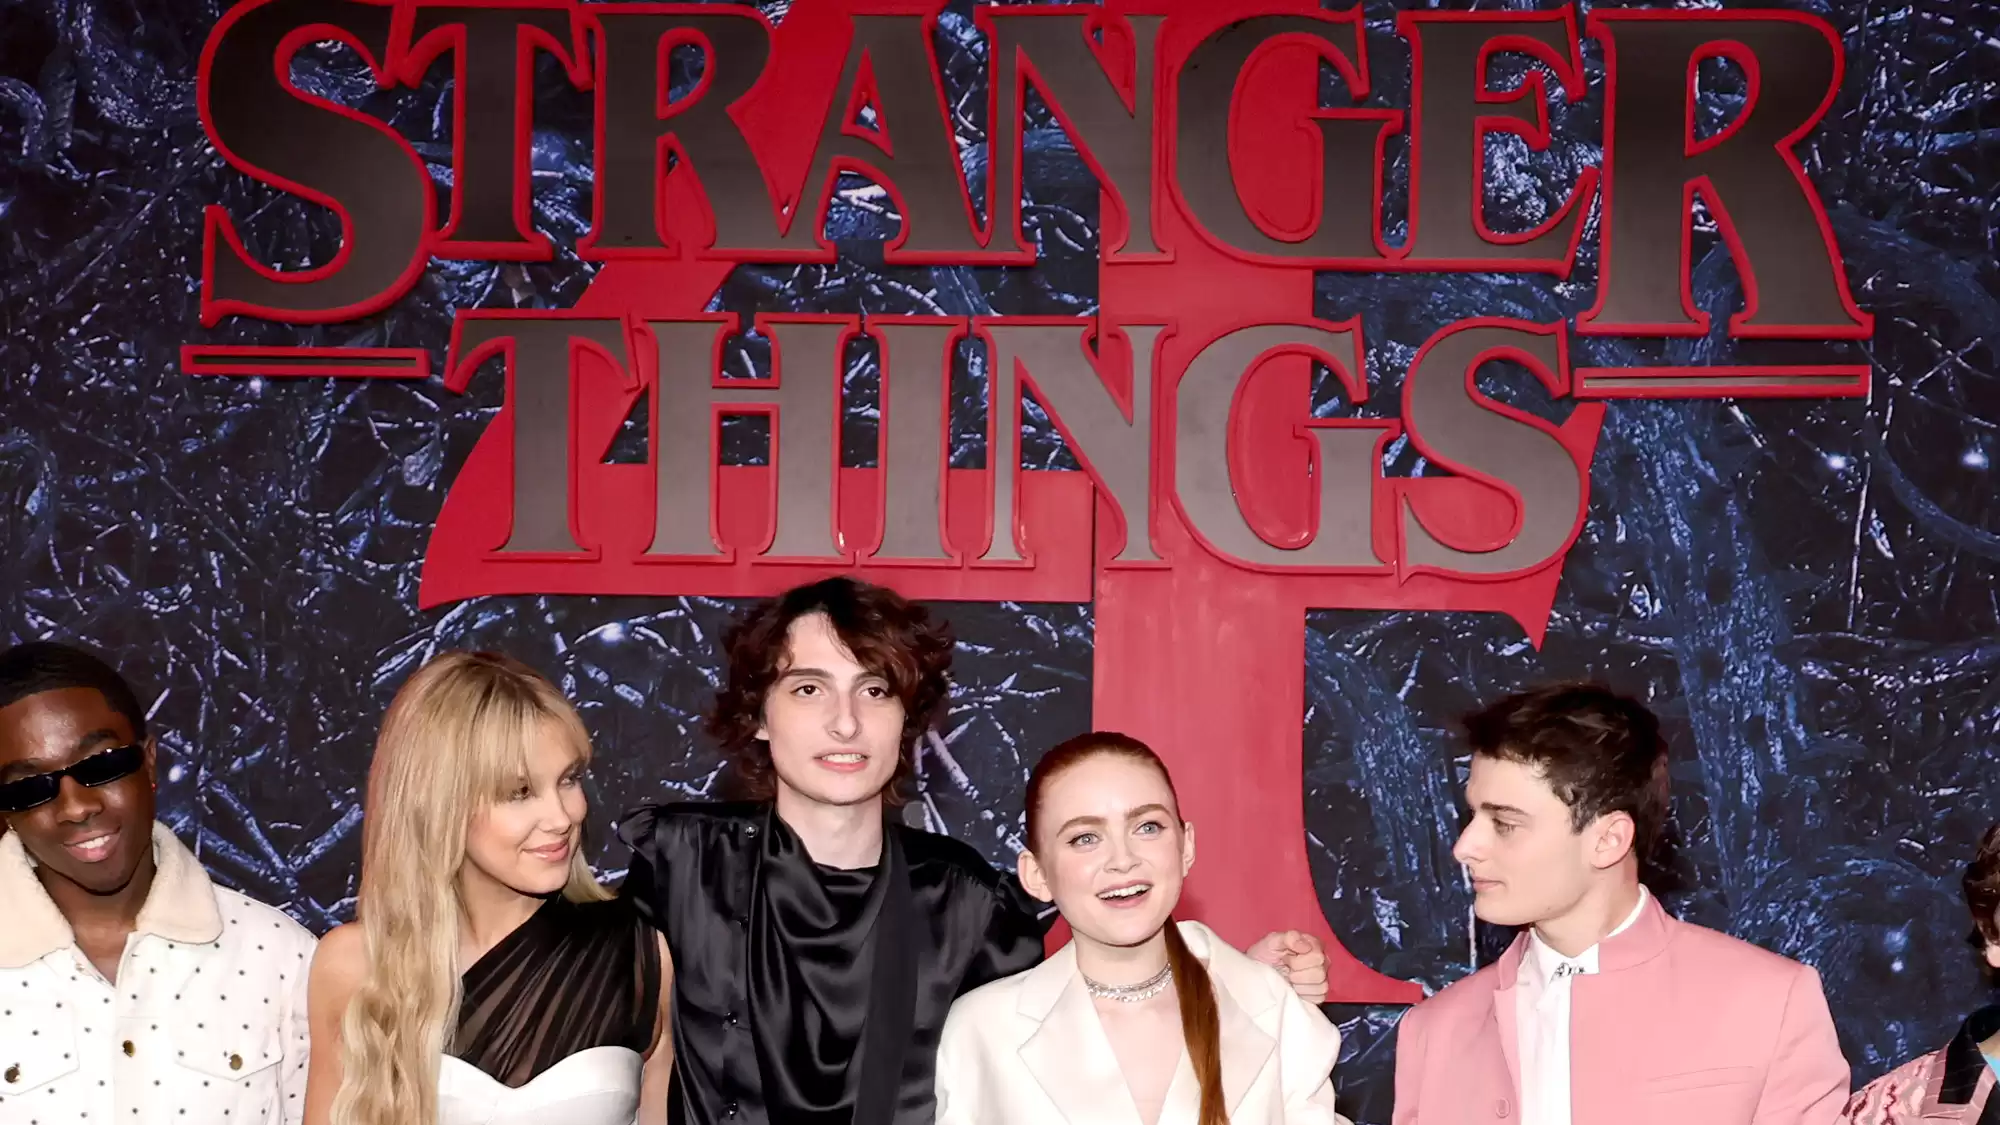 Stranger Things Star Promotes Zionism Is Sexy Stickers on Social Media - Conservative Angle